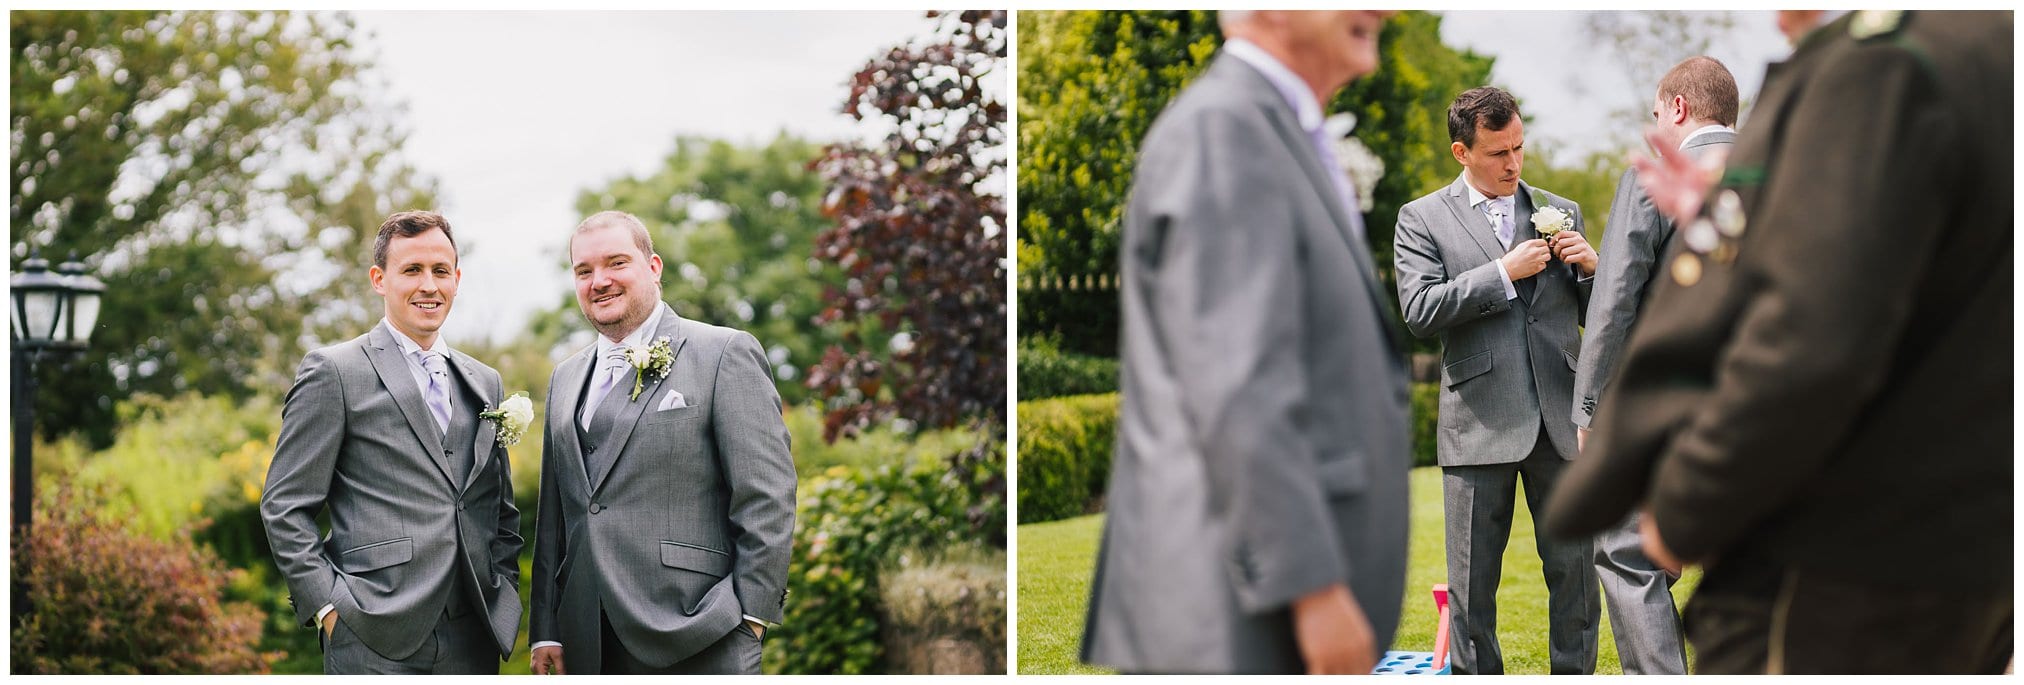 grooms getting ready wedding photographer south wales